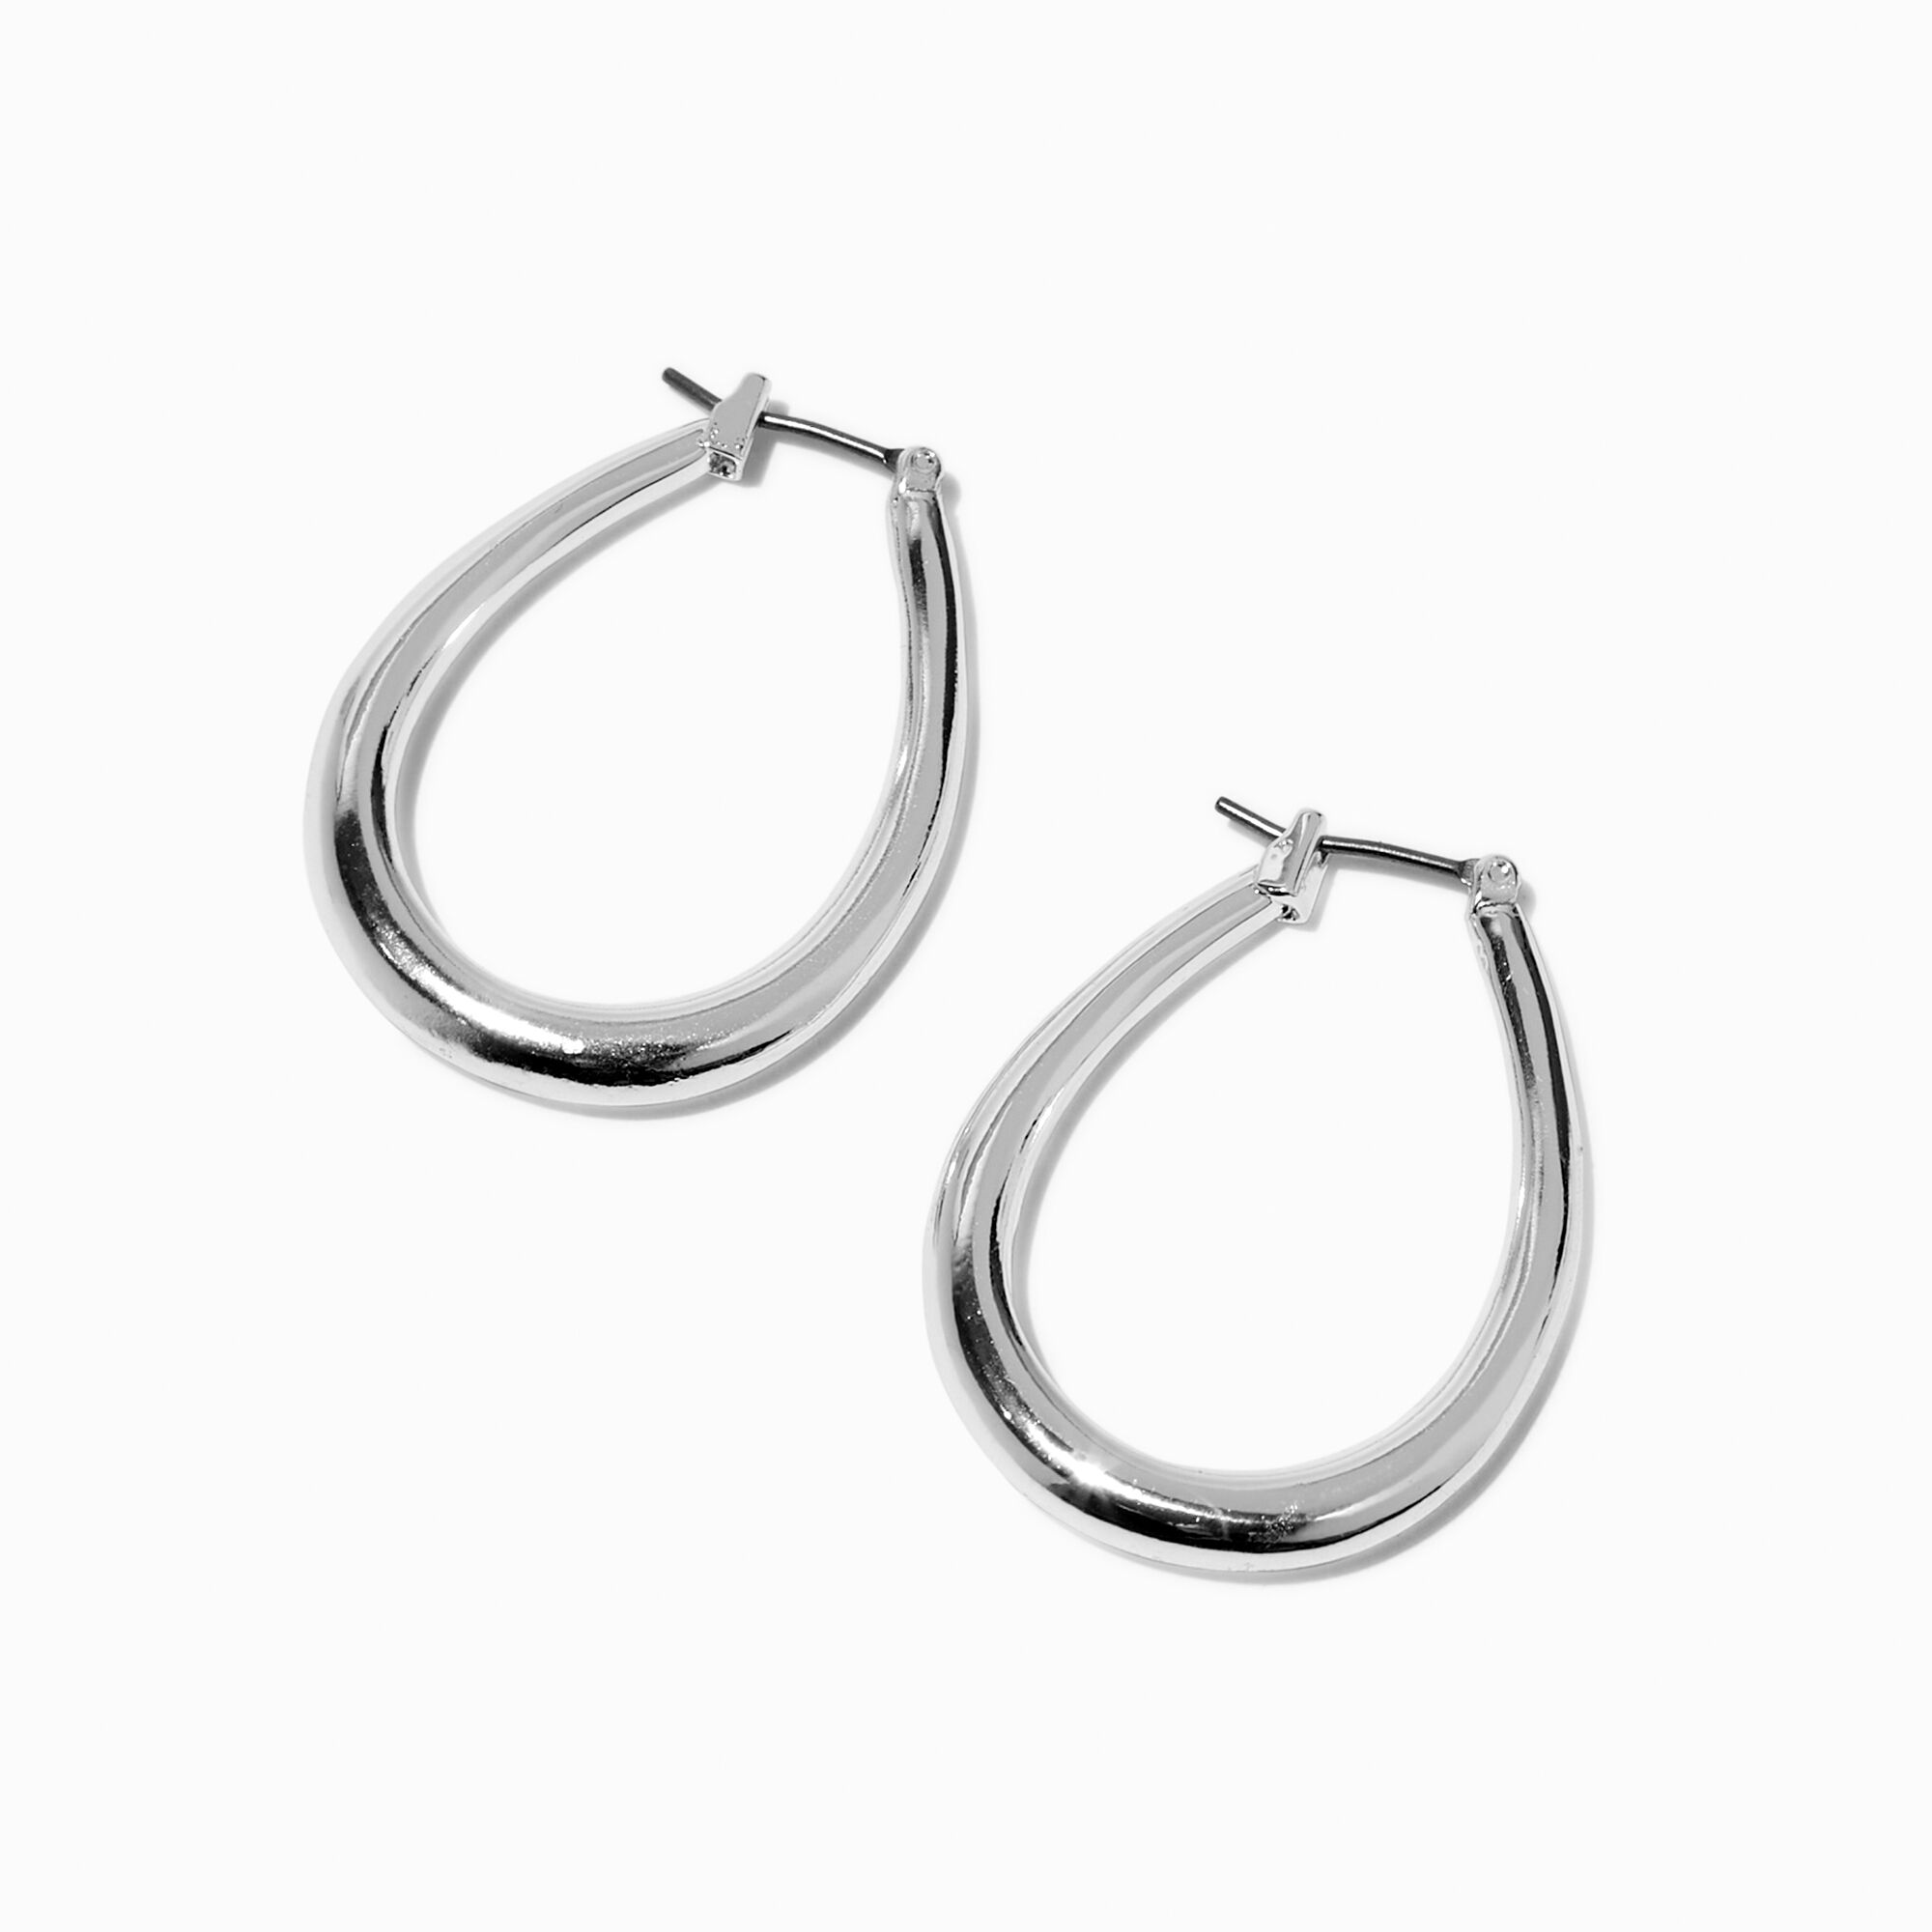 View Claires Tone 20MM Oval Hoop Earrings Silver information